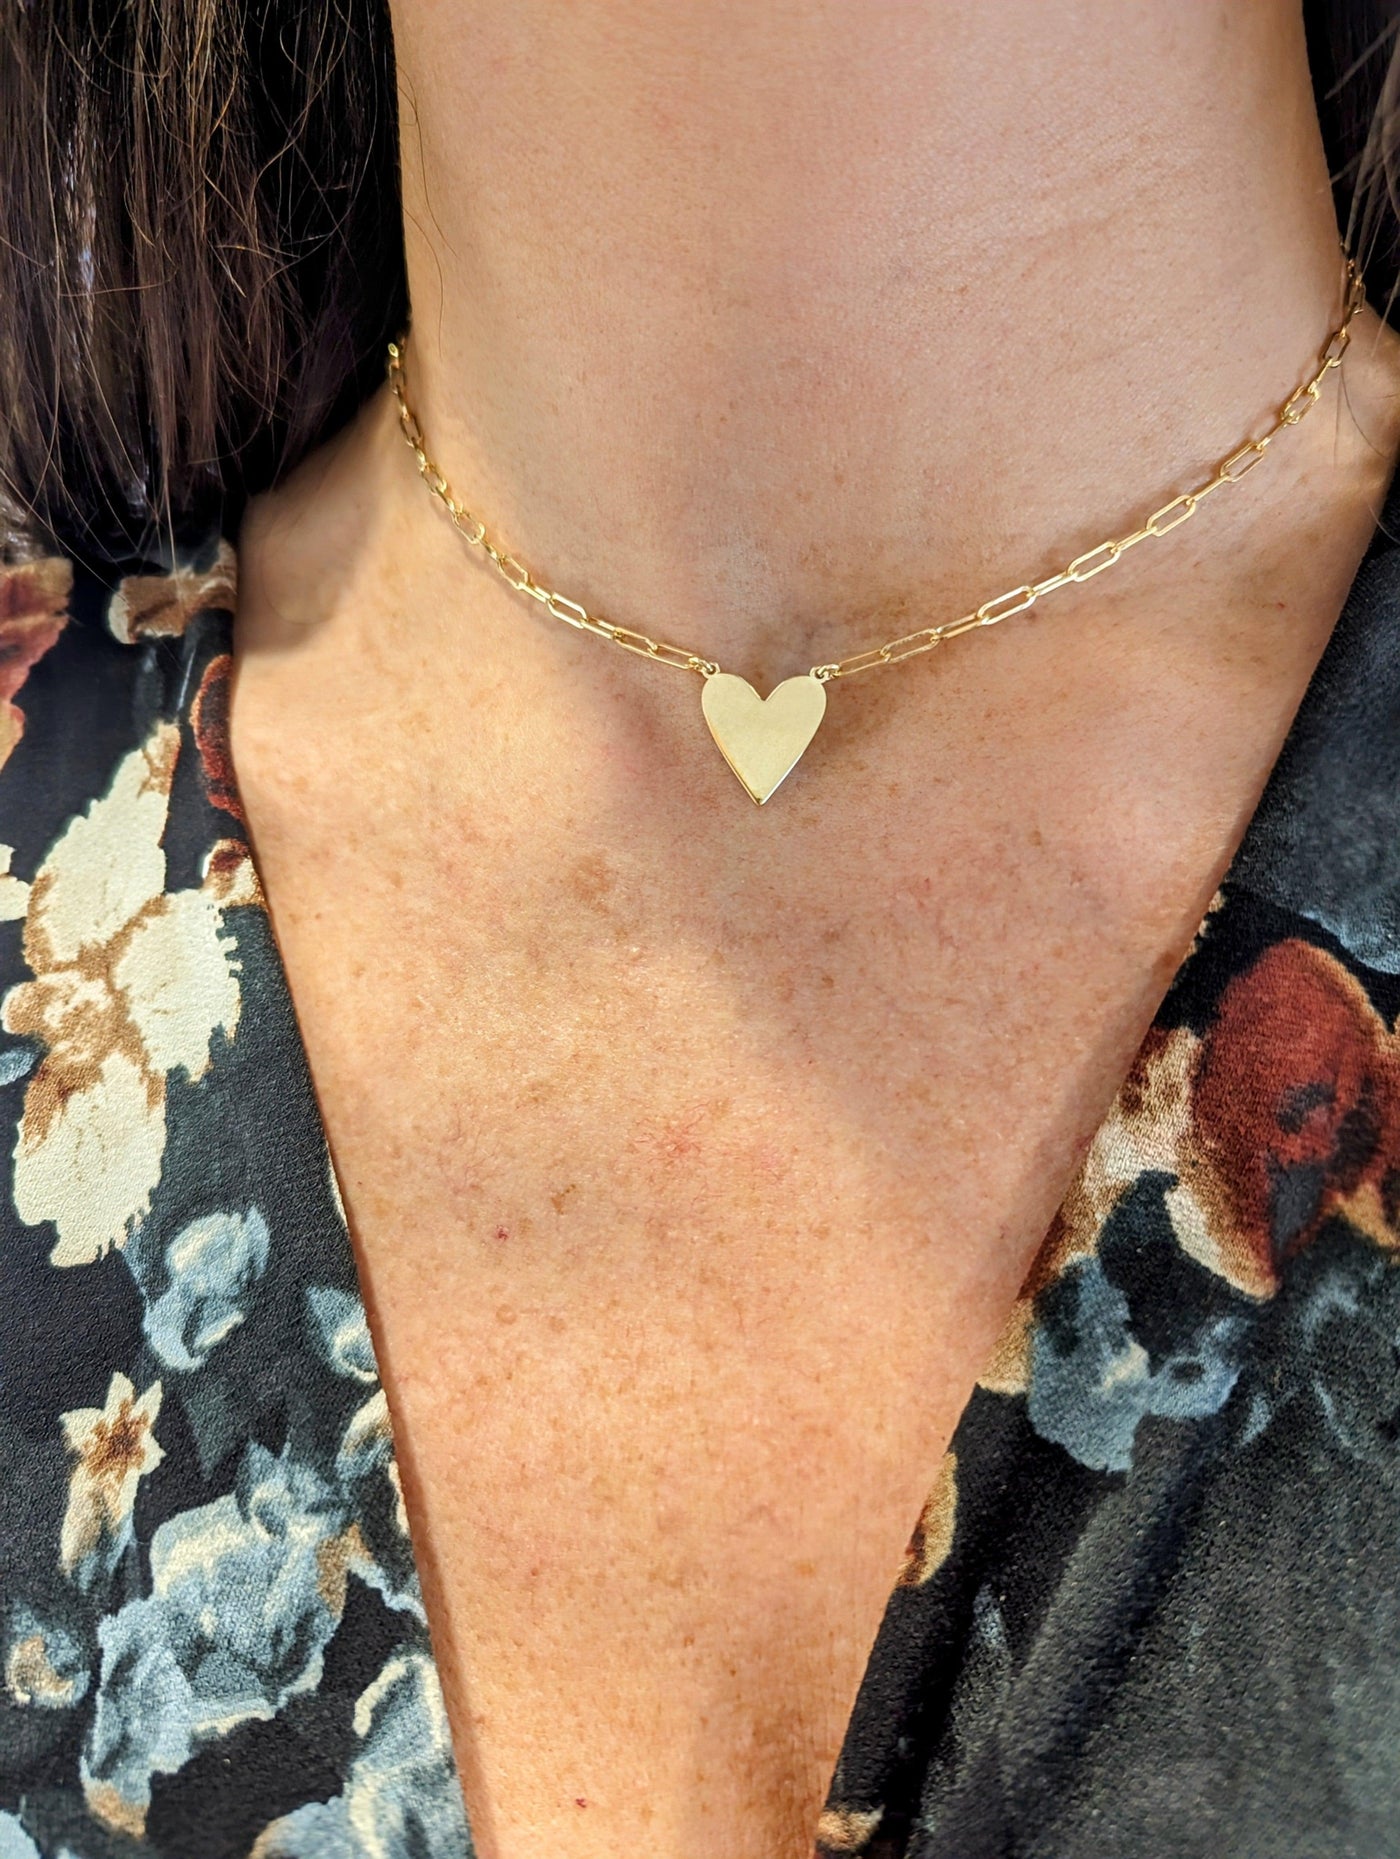 Gold Chain Link Heart Necklace - Rococo Jewellery